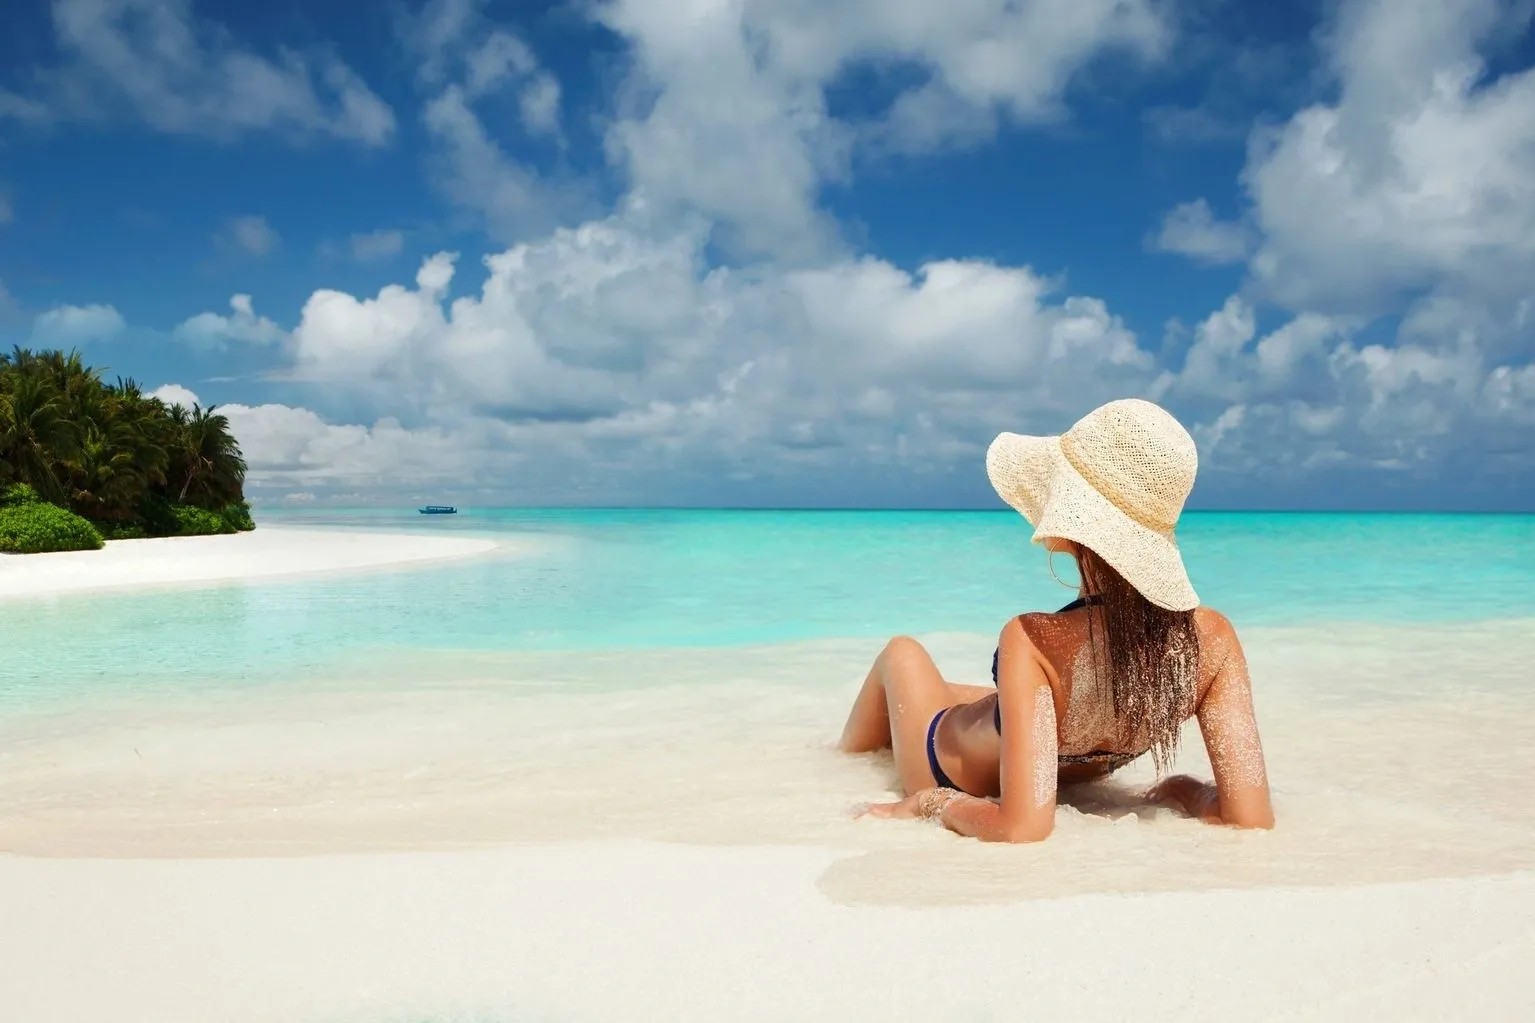 Woman in a straw hat relaxing on a sandy beach, facing a clear blue ocean under a bright sky with her Red Light Skin Care device nearby.